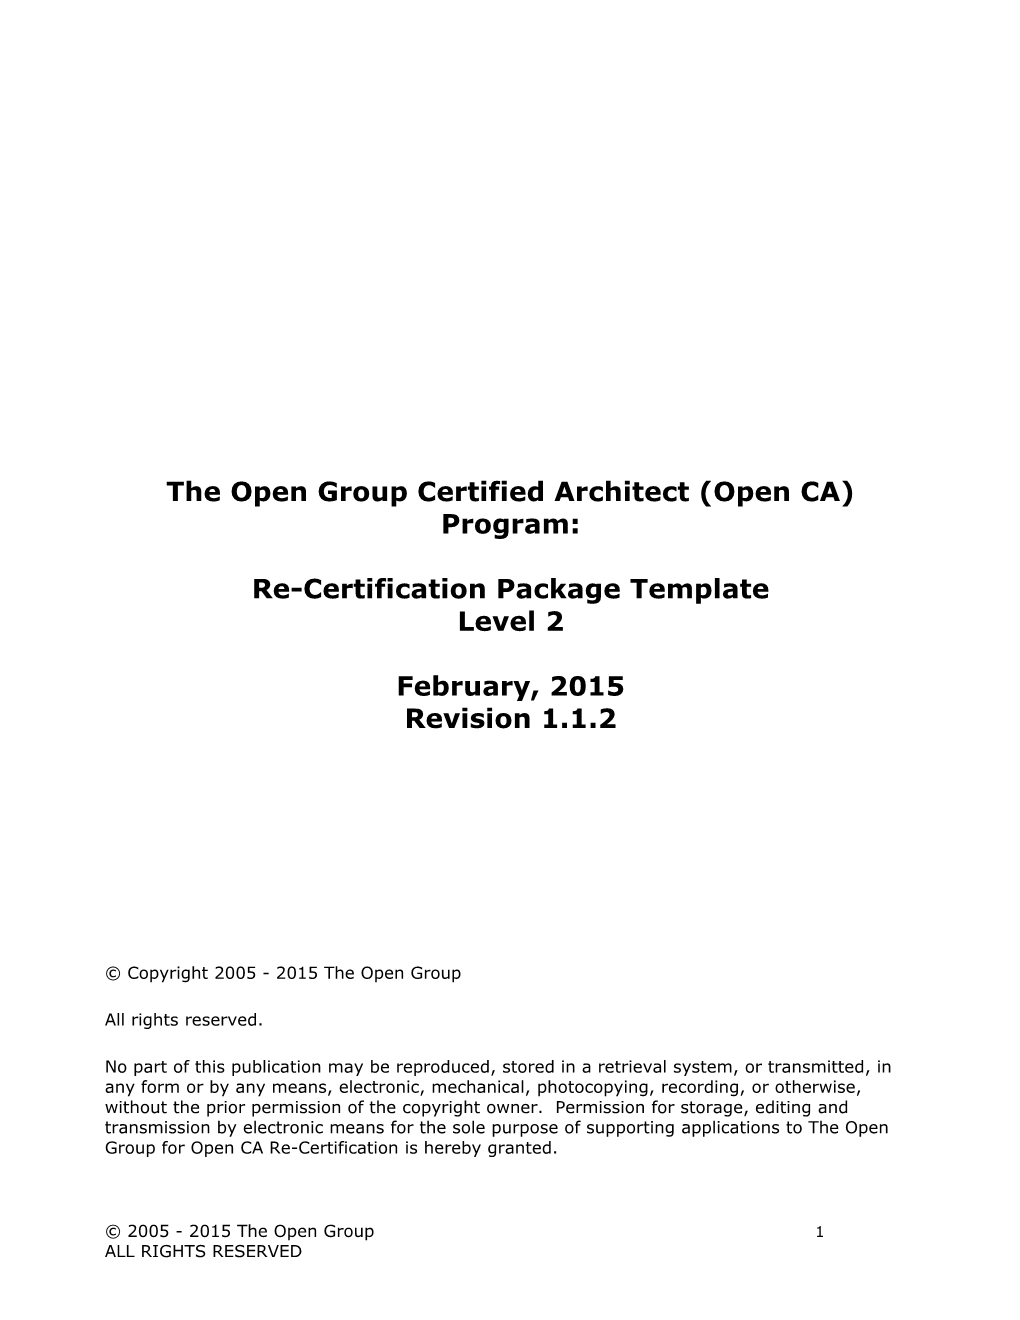 Certification Package Template - L2